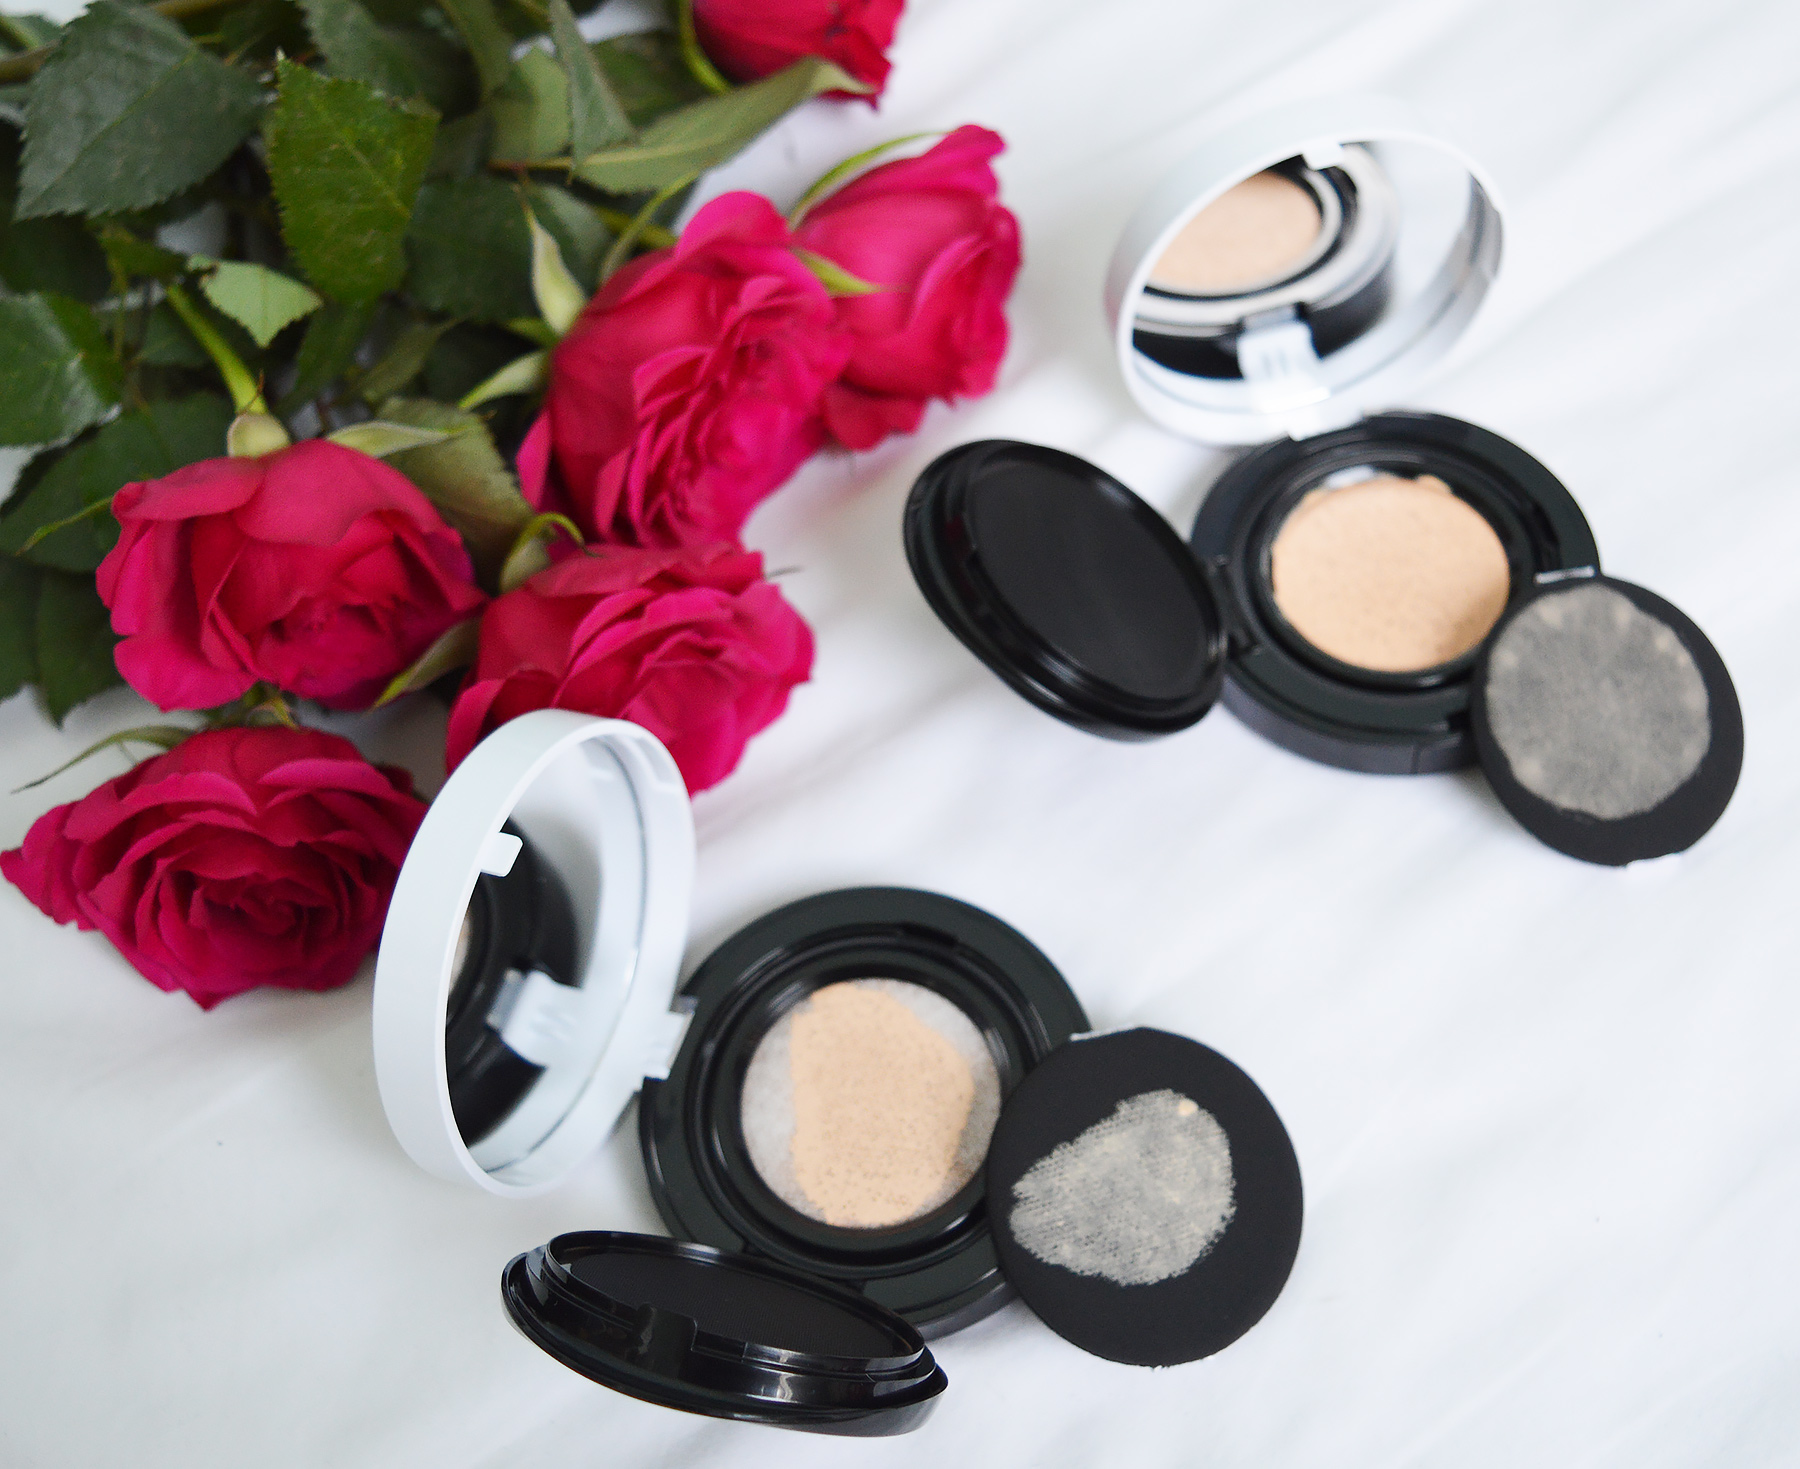 The Body Shop New Compact Foundation review